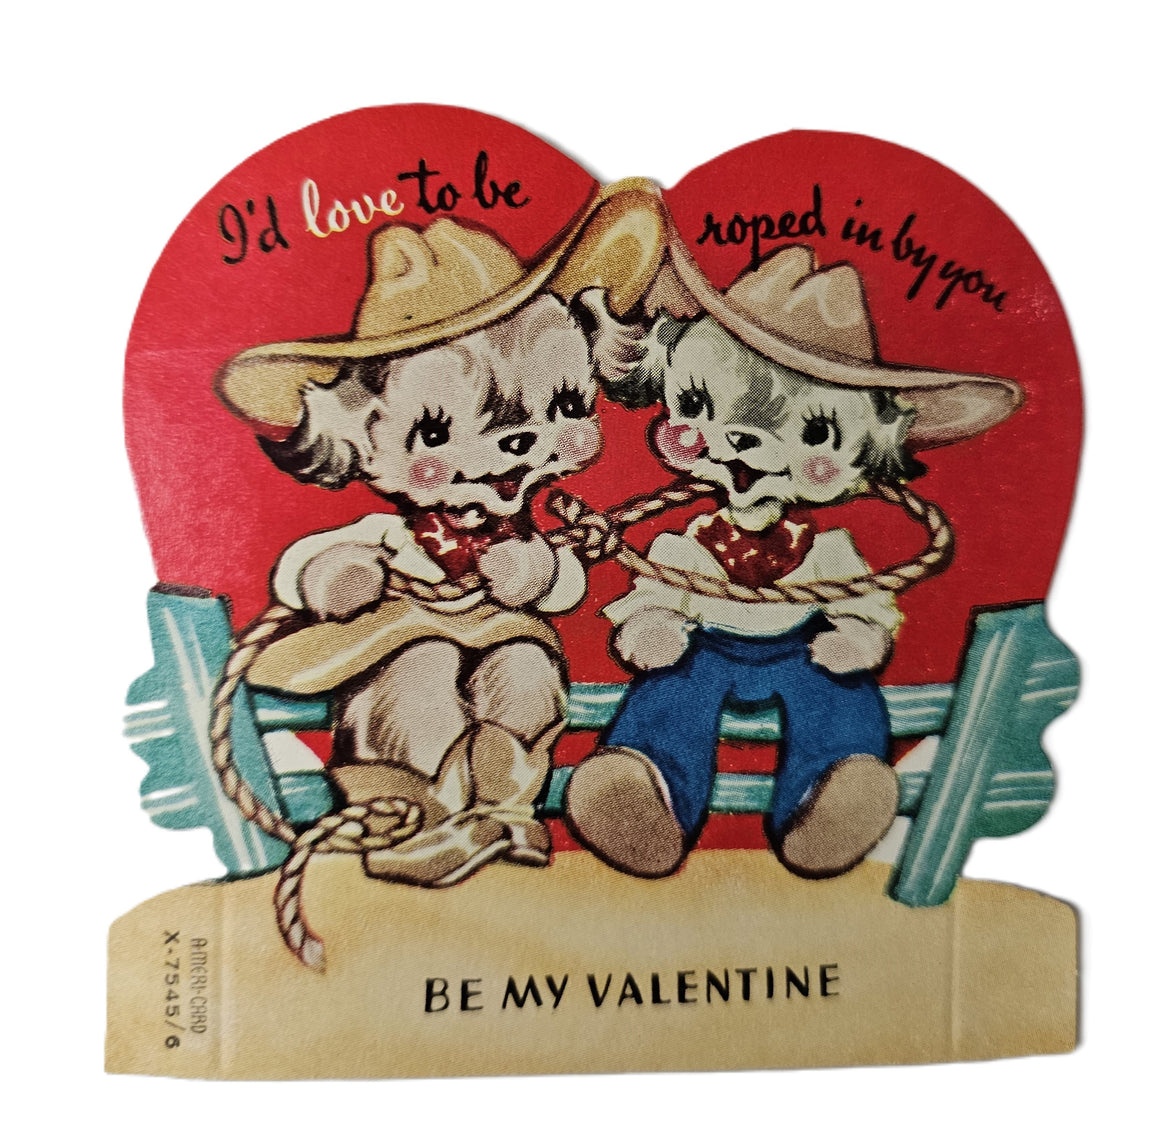 Vintage 1950s Valentine Card Two Dogs Sitting on Fence Dressed as Cowboy & Cowgirl "I Love to Be Roped By You"